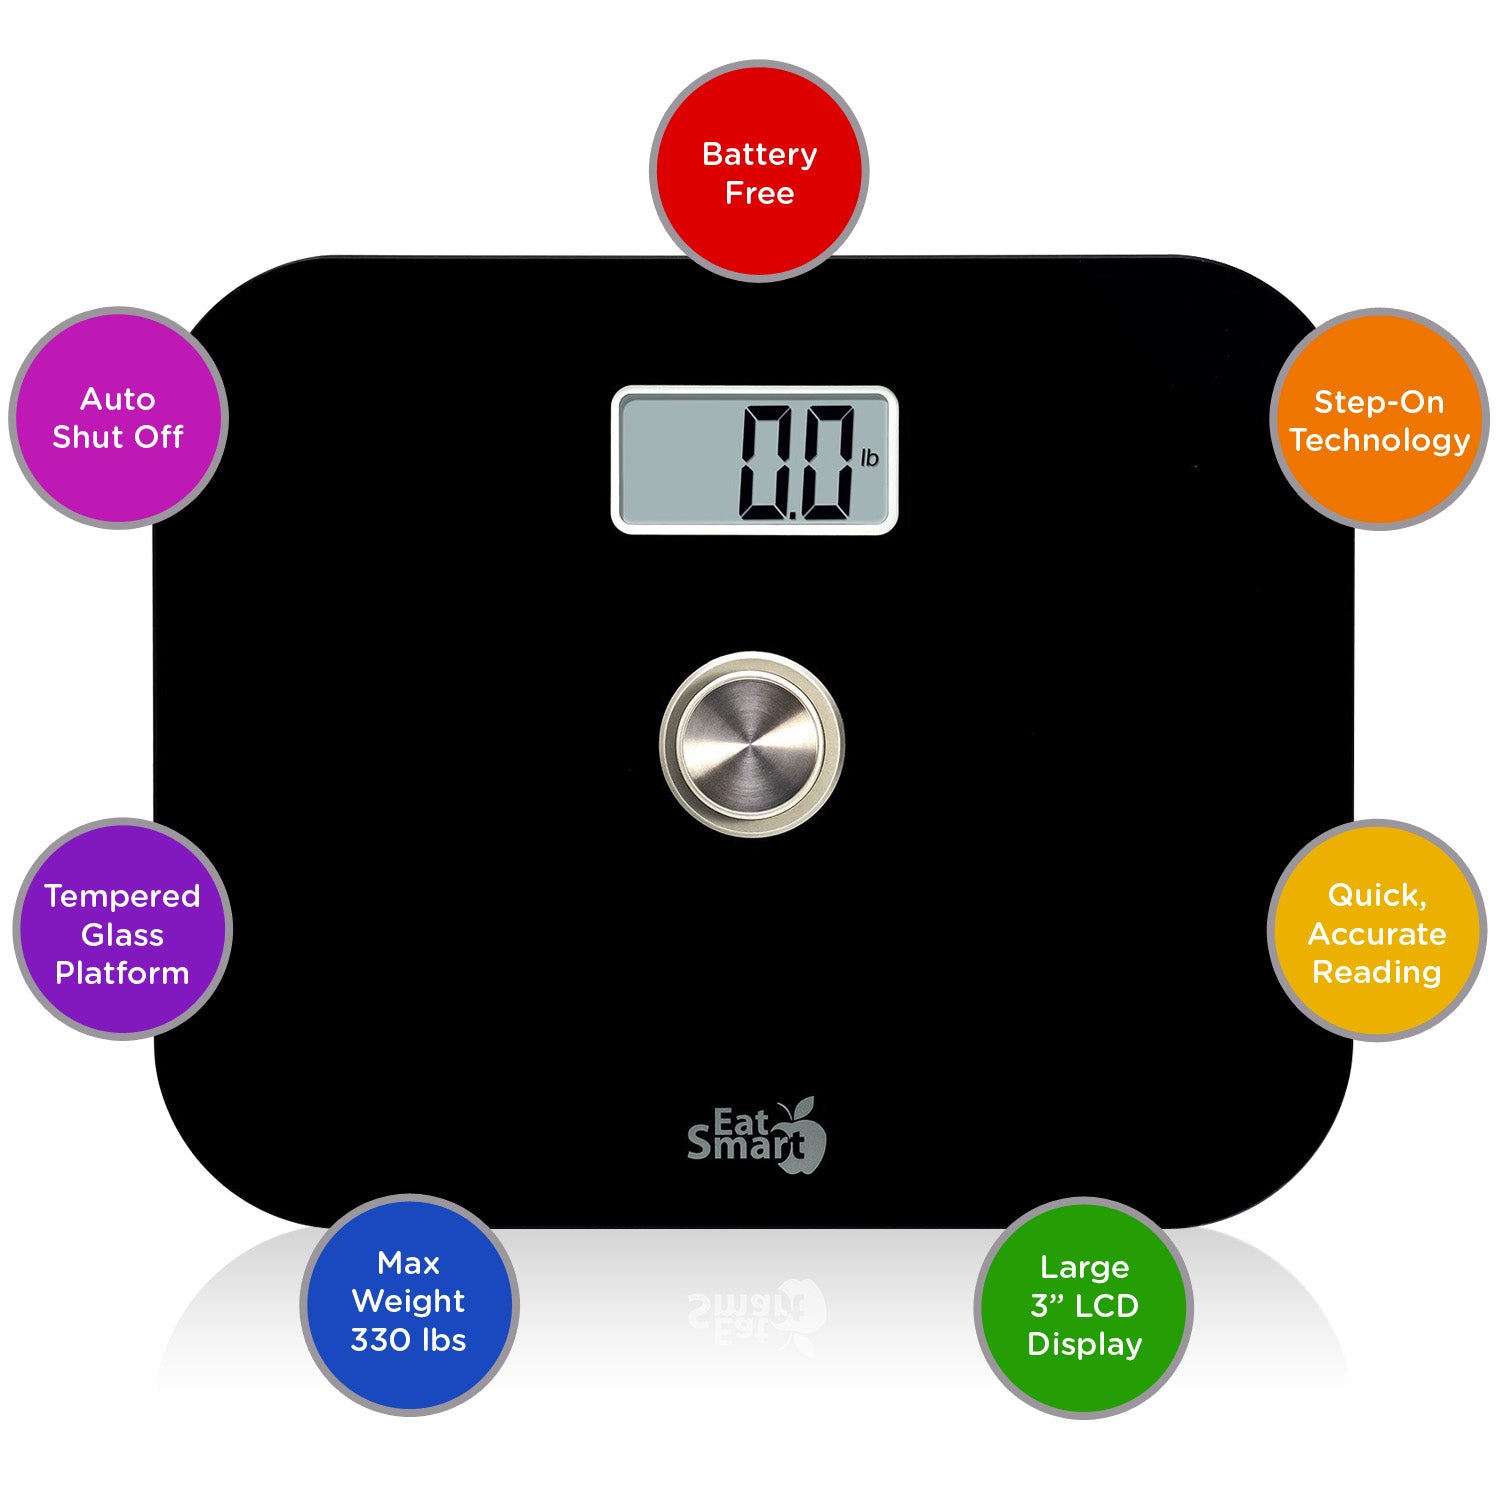 Introducing the Precision Power Battery Free Digital Scale – Eat Smart